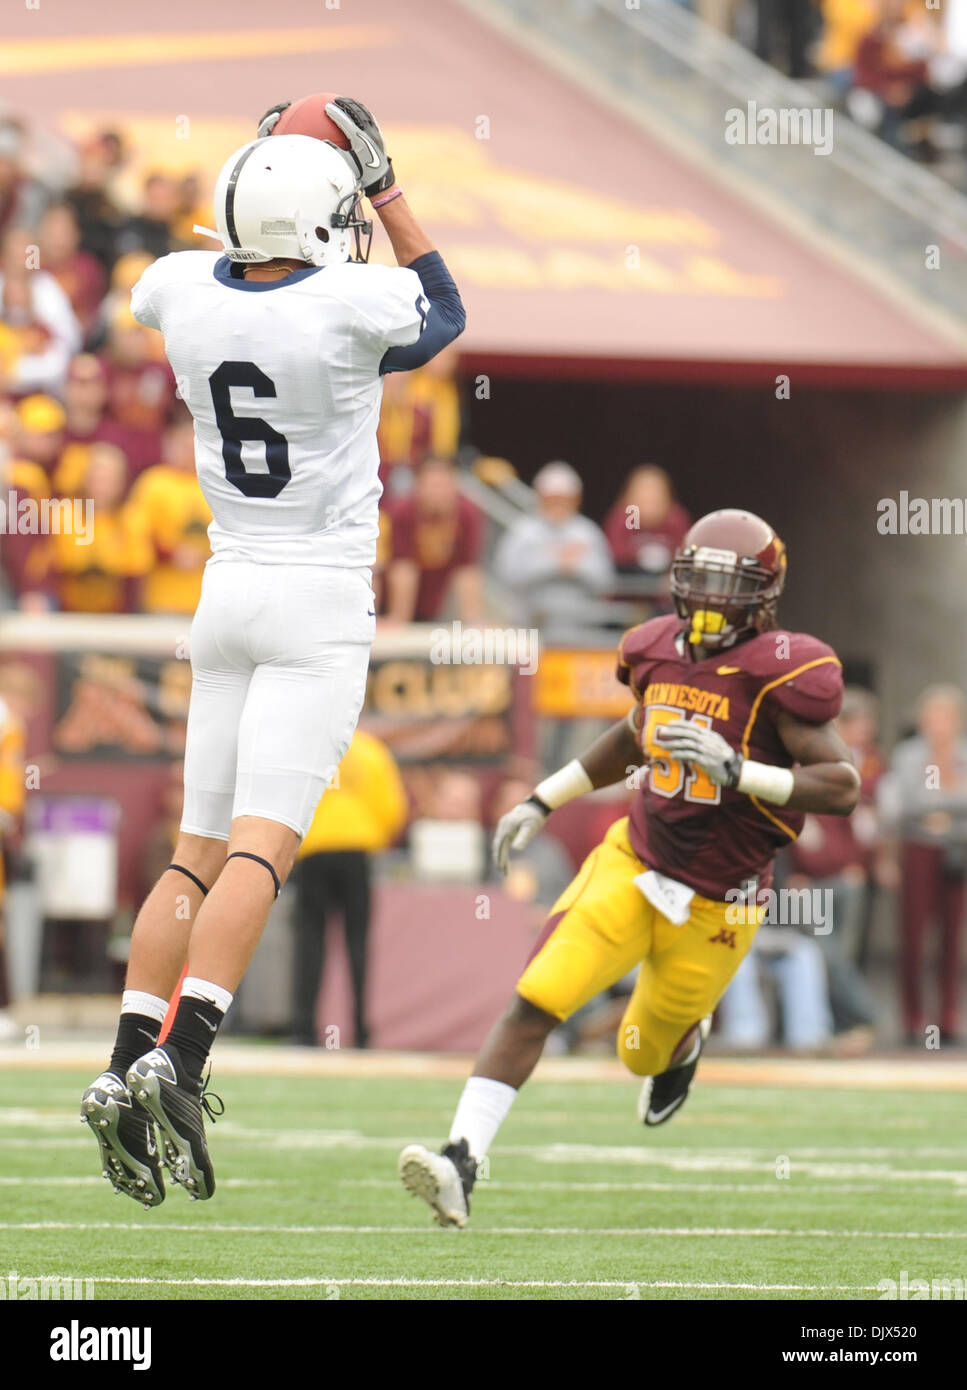 Oct. 23, 2010 - Minneapolis, Minnesota, United States of America - Penn State University wide receiver Derek Moye (#6) makes the catch for a 30 yard gain in the second quarter of the game between the Minnesota Gophers and the Penn State Nittany Lions at the TCF Stadium in Minneapolis, Minnesota.  Penn State leads Minnesota 21-7 at halftime. (Credit Image: © Marilyn Indahl/Southcree Stock Photo